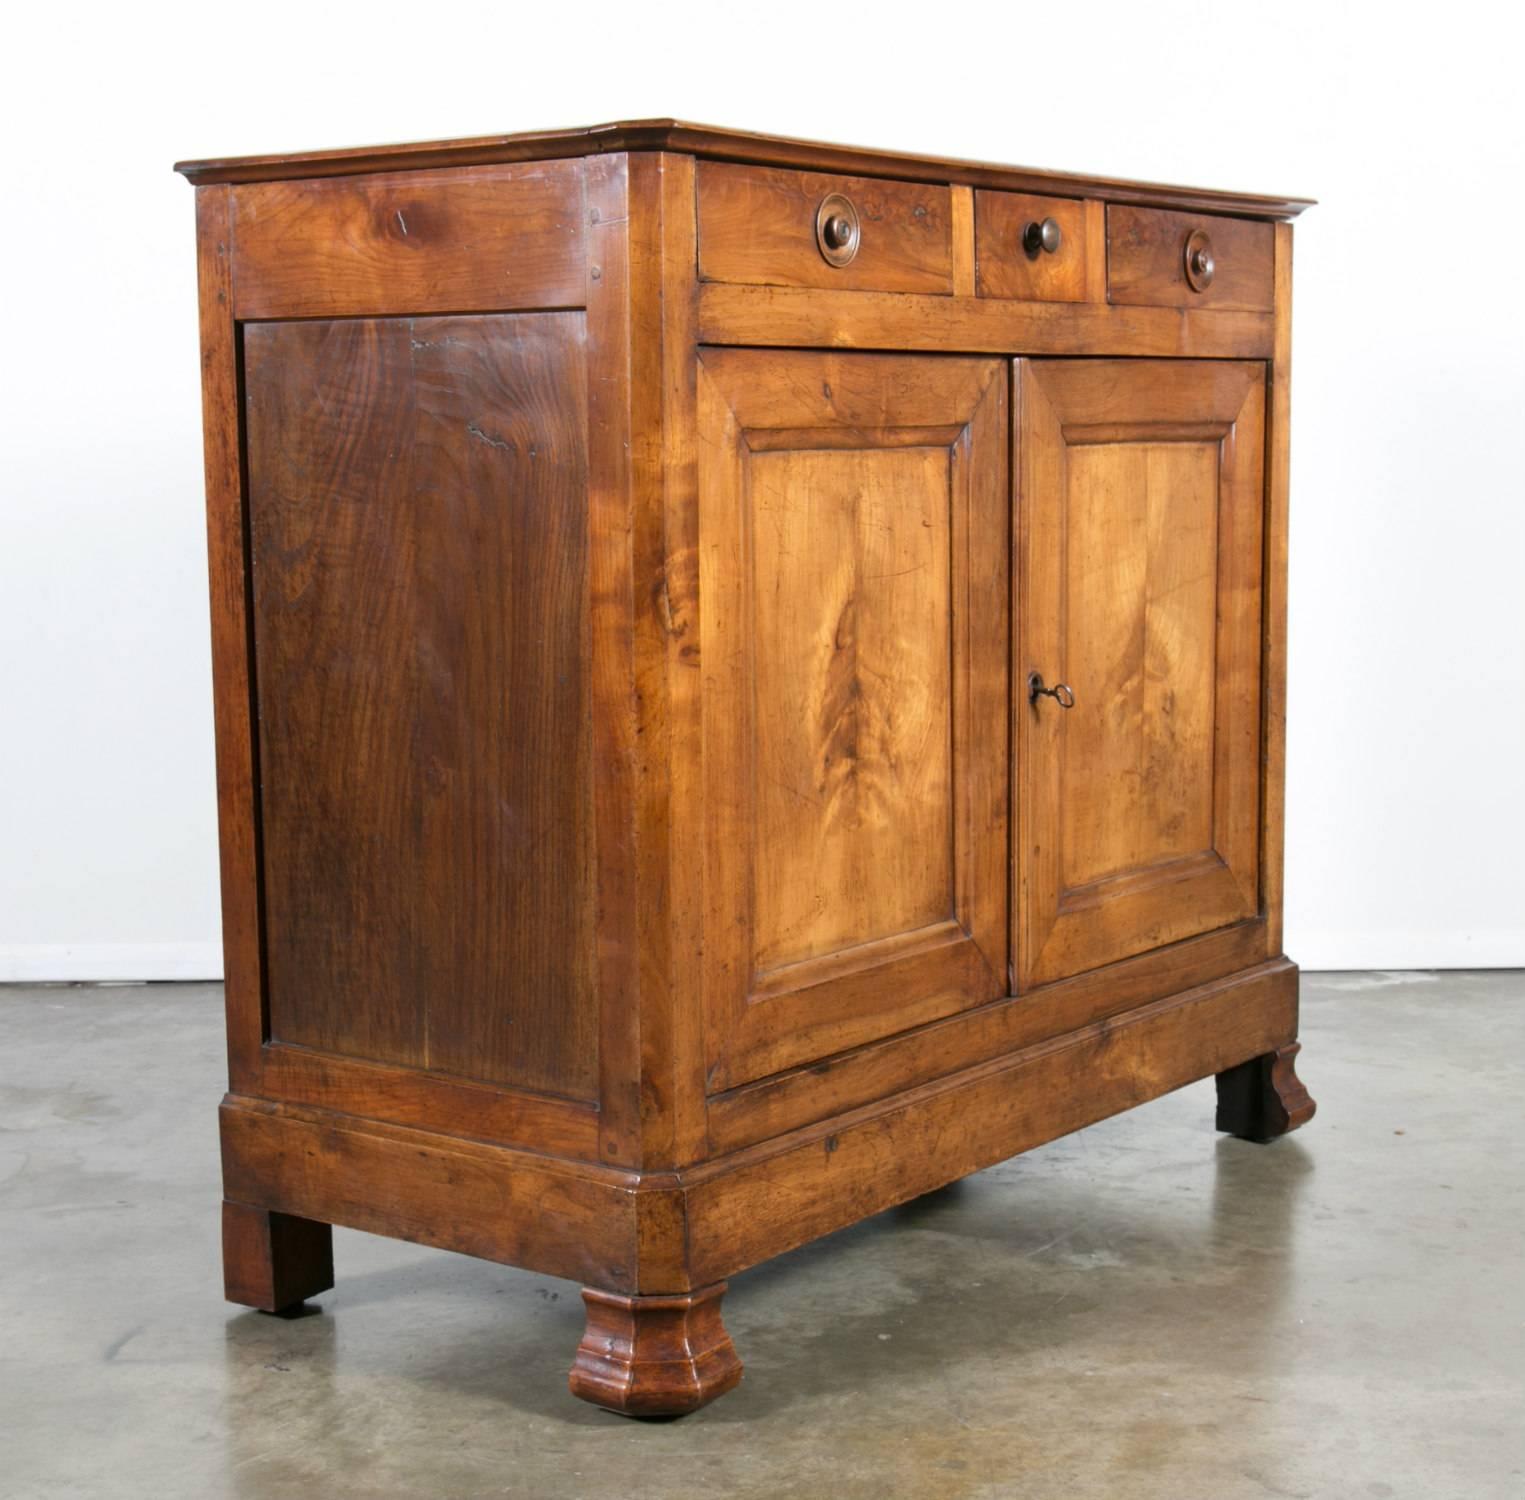 A very handsome solid cherry Louis Philippe period buffet d'appui, having three drawers over two paneled doors, resting on flat bun feet. The interior opens for great storage. This stately gentleman's buffet retains its beautiful rich, original